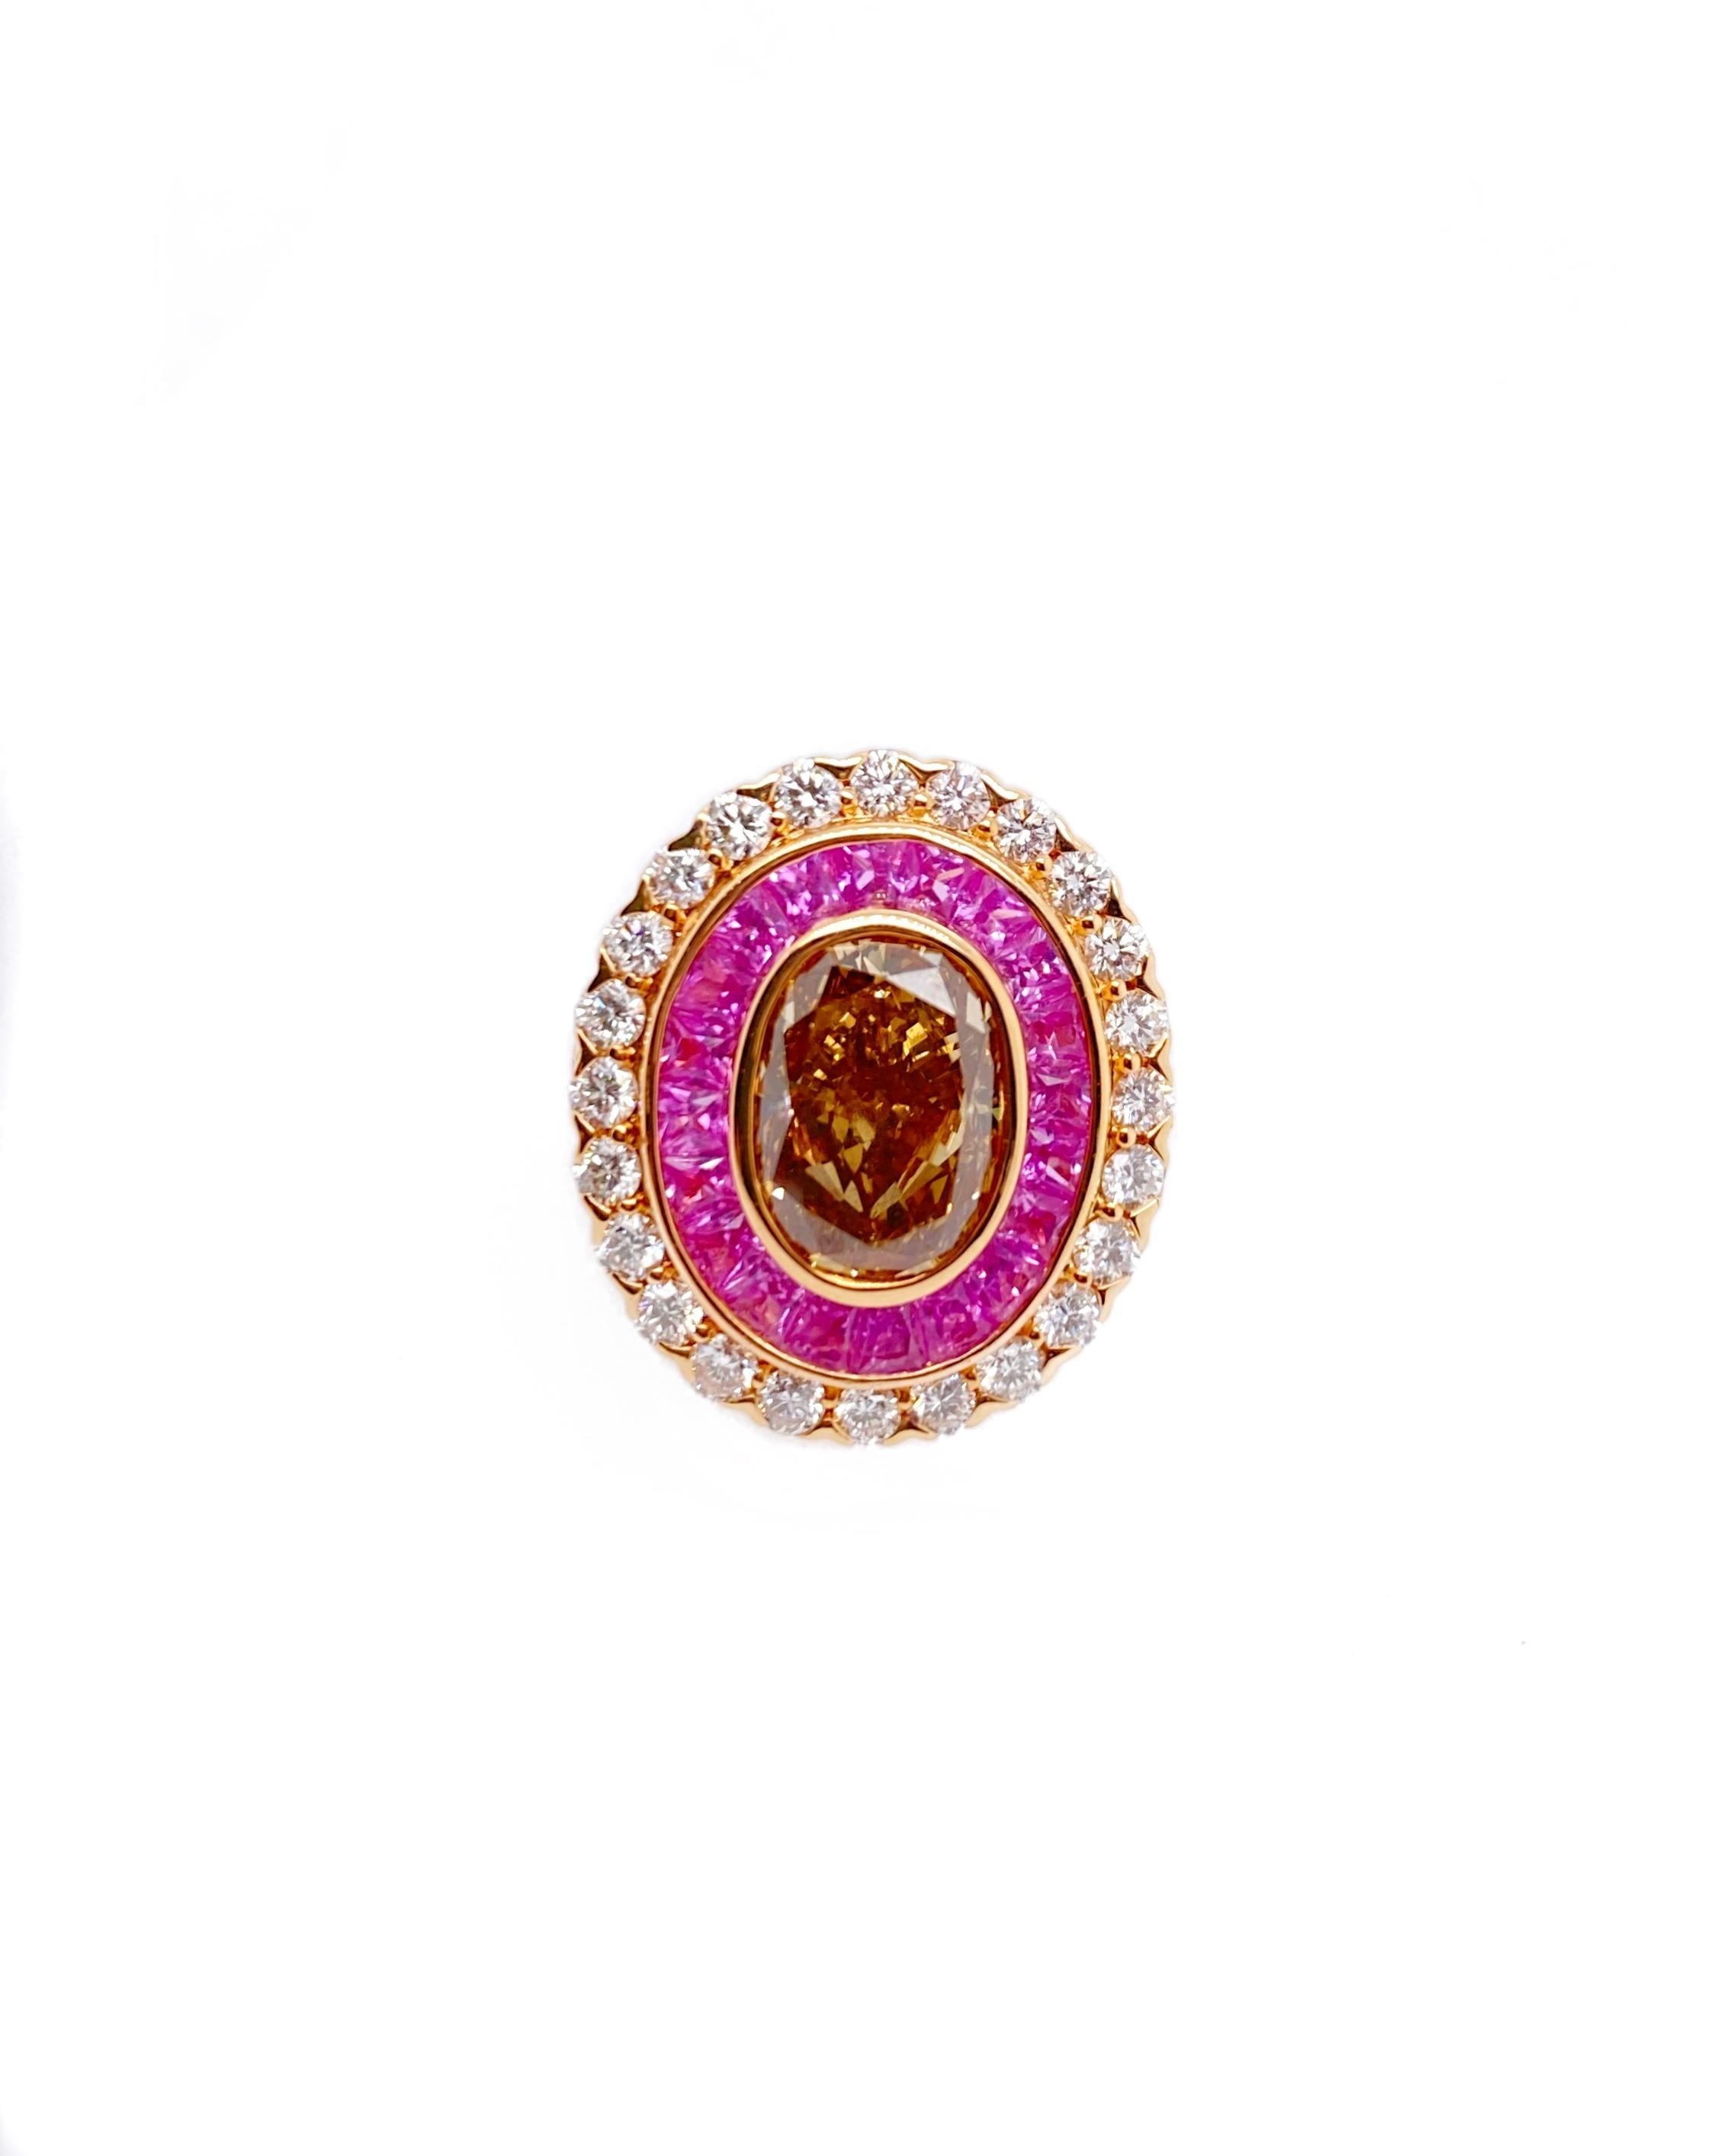 18kt rose gold ring with a center igi certified oval fancy brown vs2-si1  (ovc245) set in diamond and pink sapphire setting with 3.31ct diamonds around in halo setting split shank.
